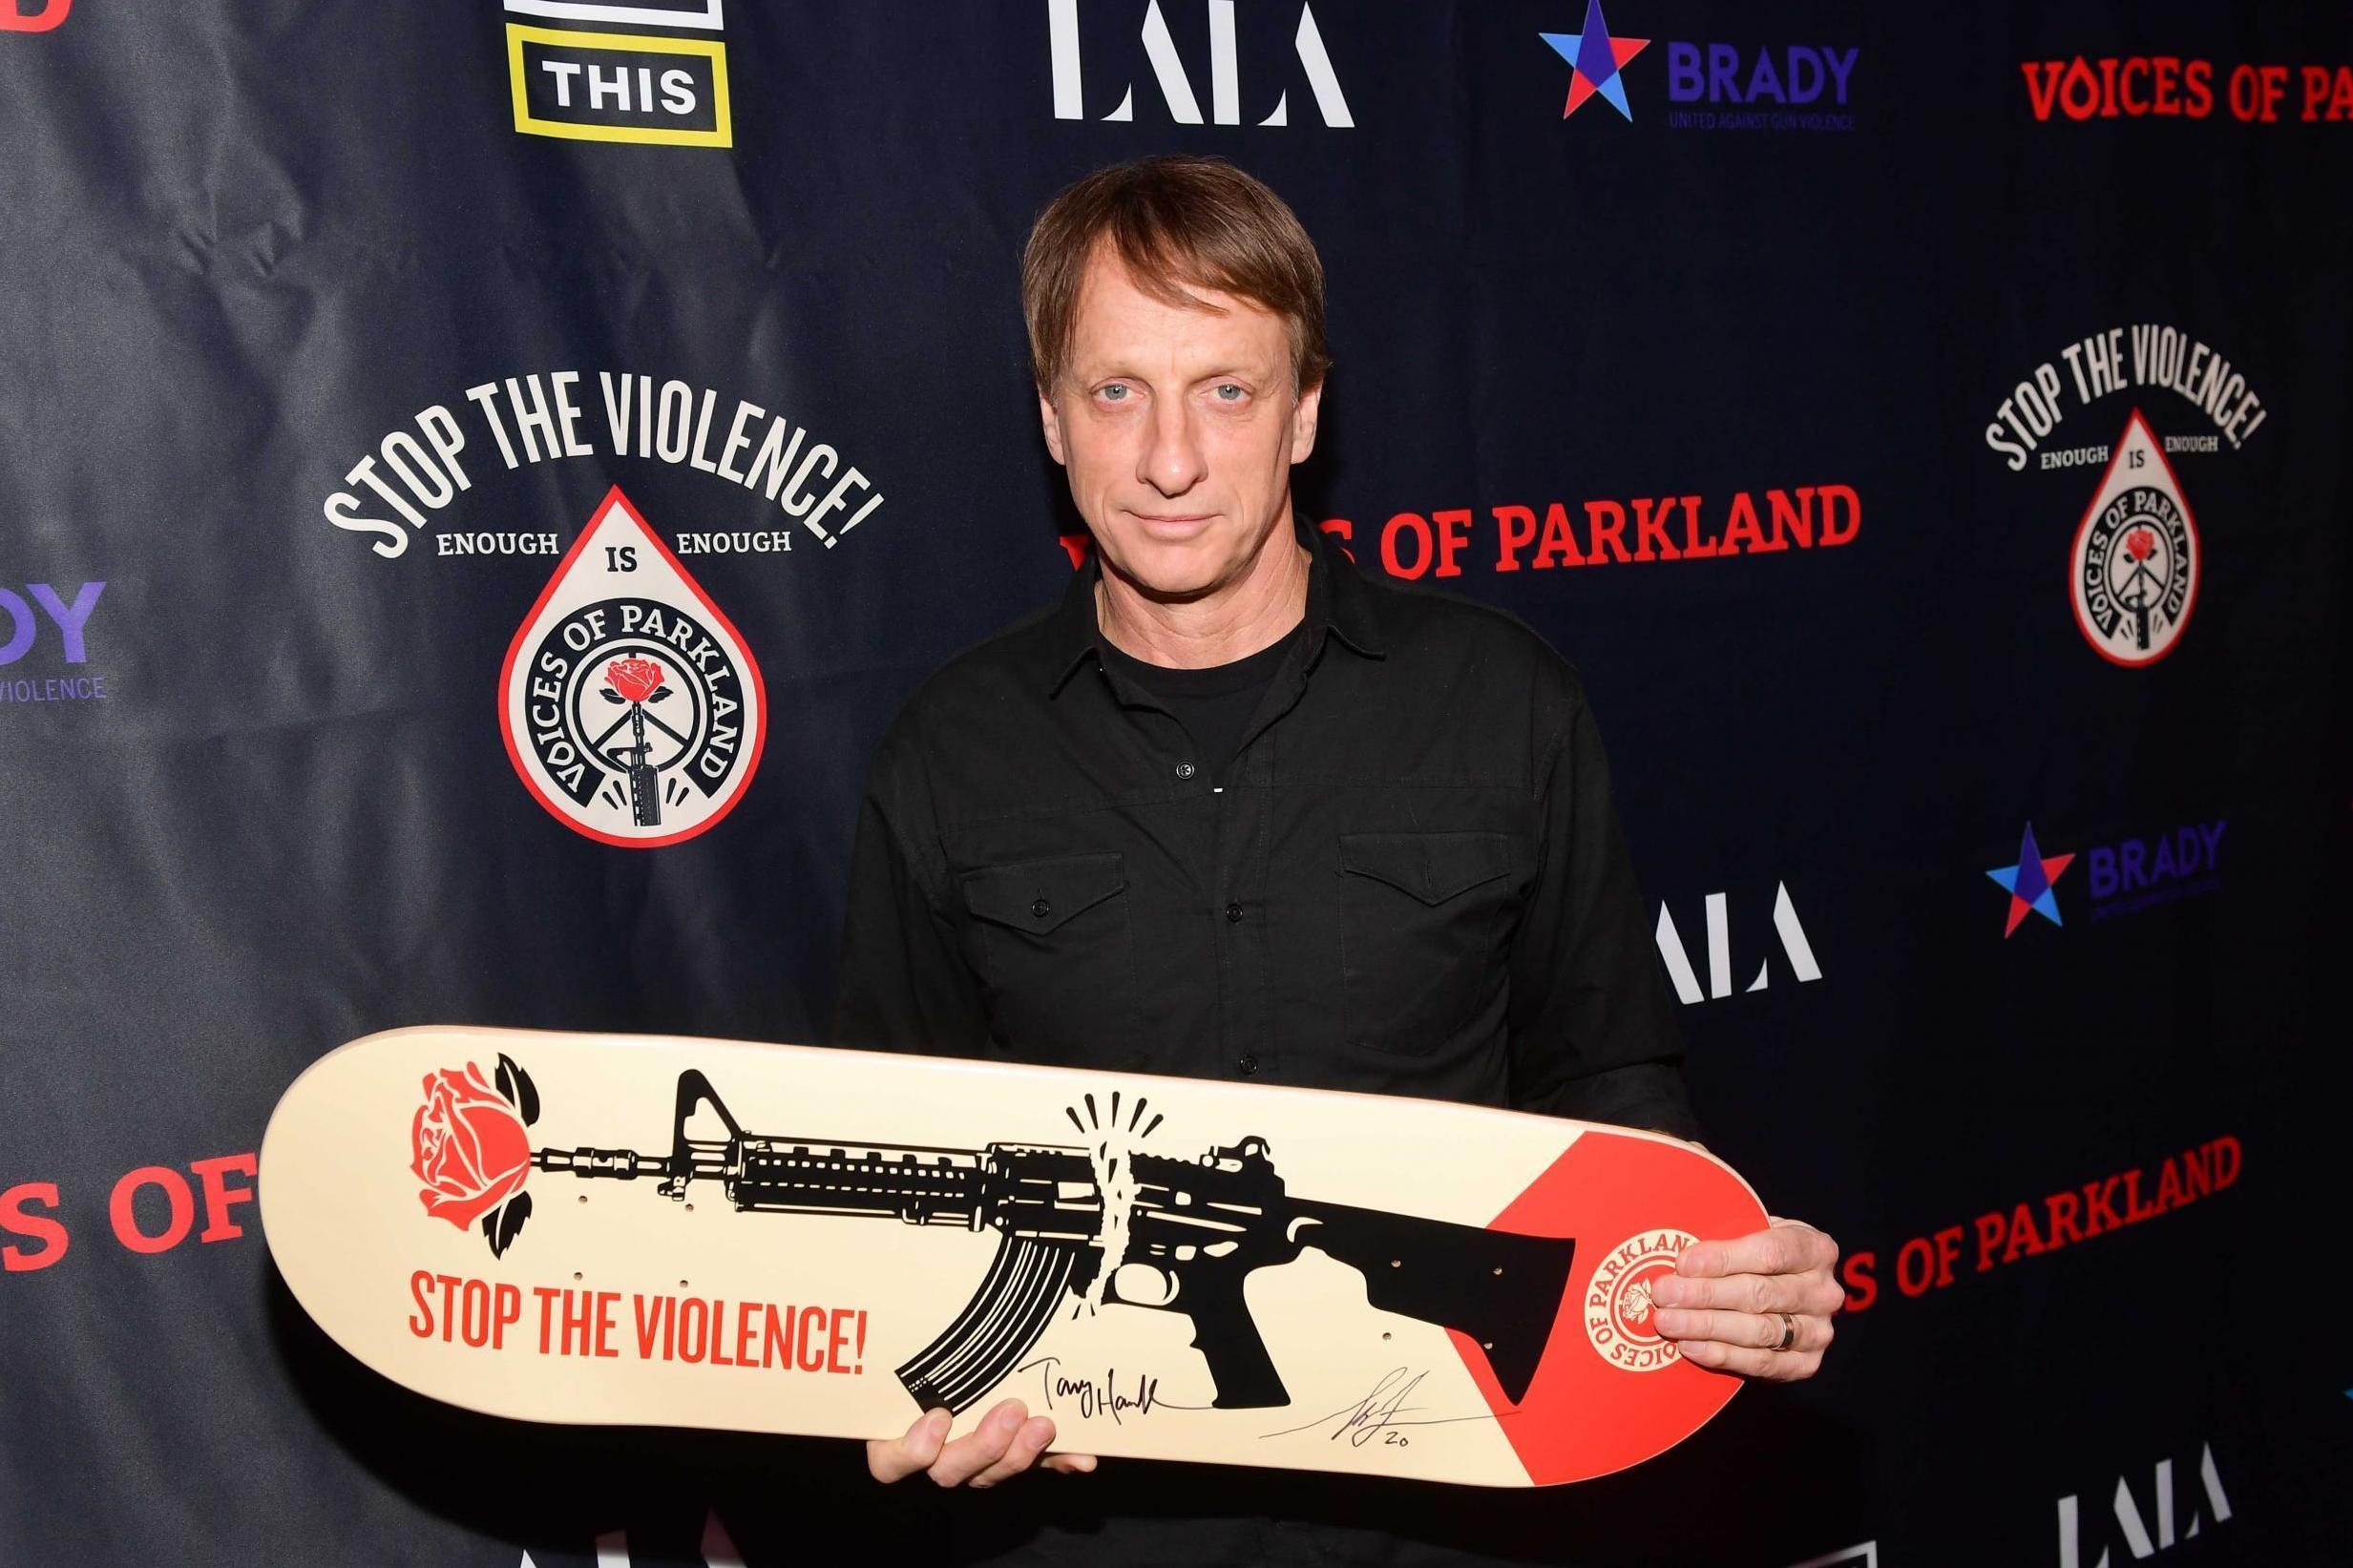 Tony Hawk exchanges skateboards with six-year-old fan thanks to help from FedEx driver